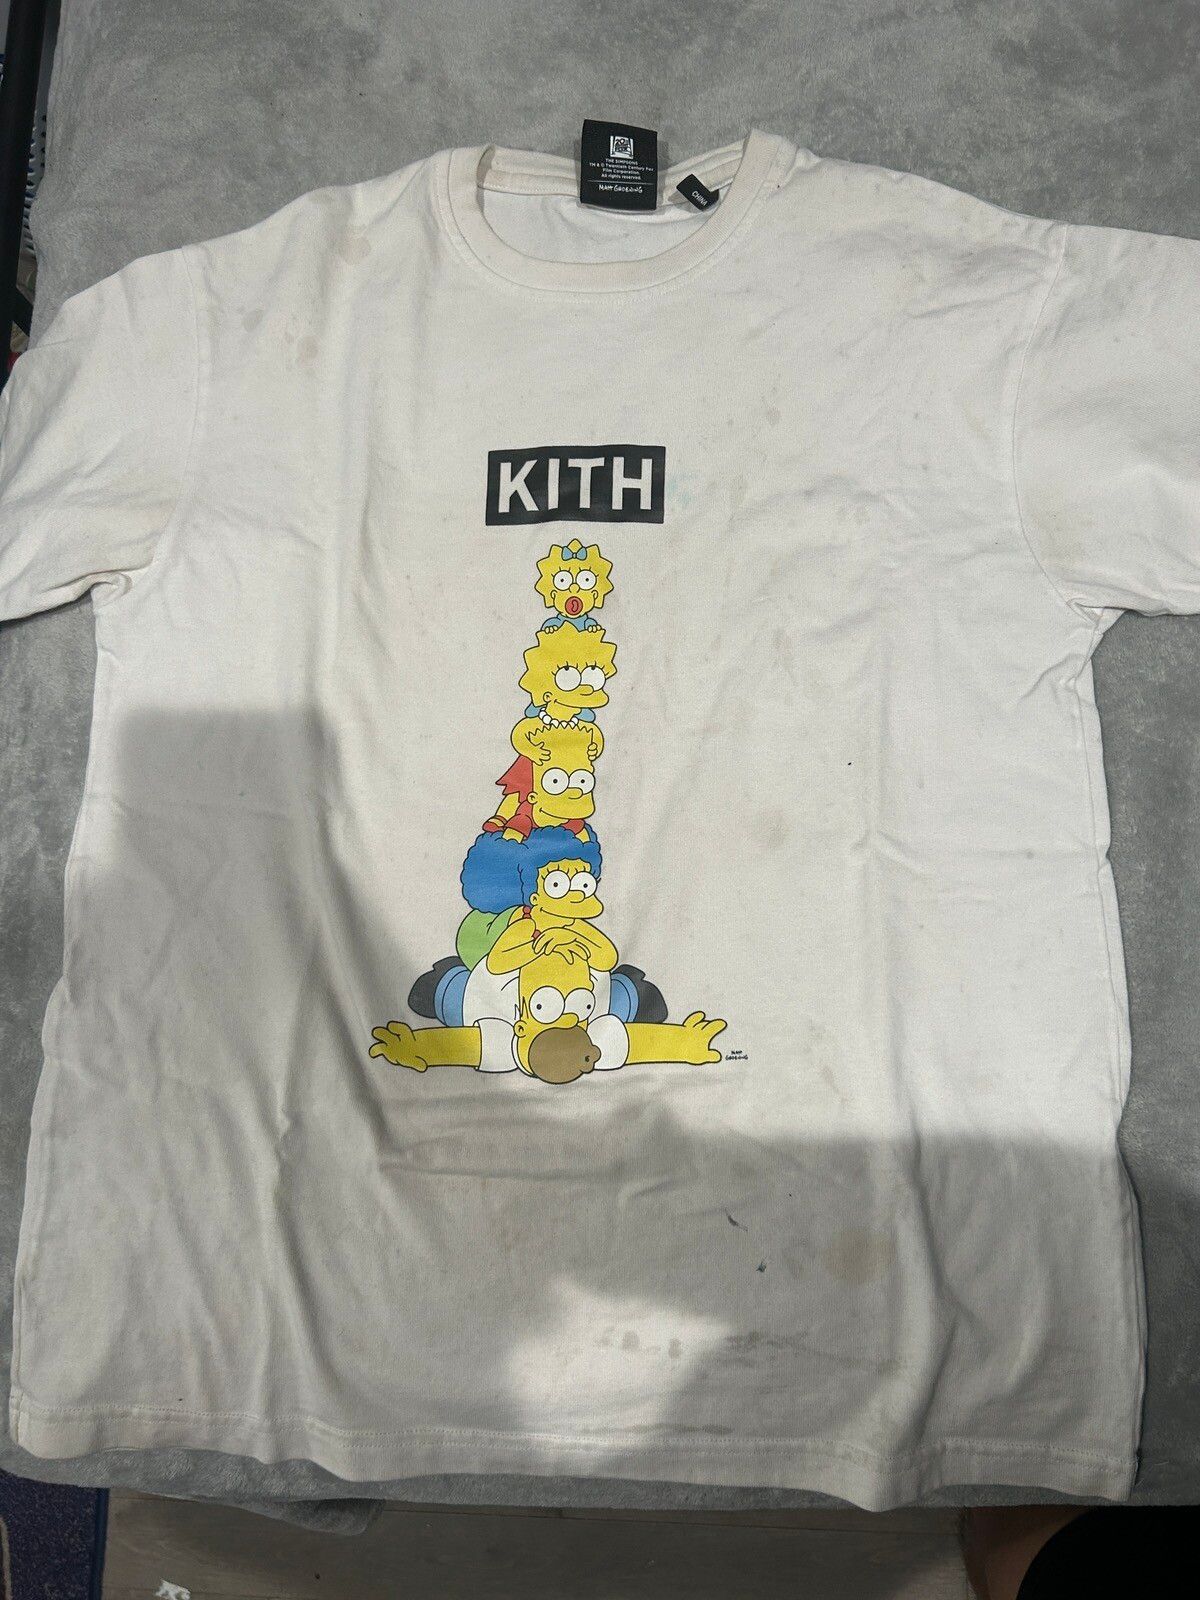 Kith Kith x The Simpsons “Family Stack Tee” | Grailed